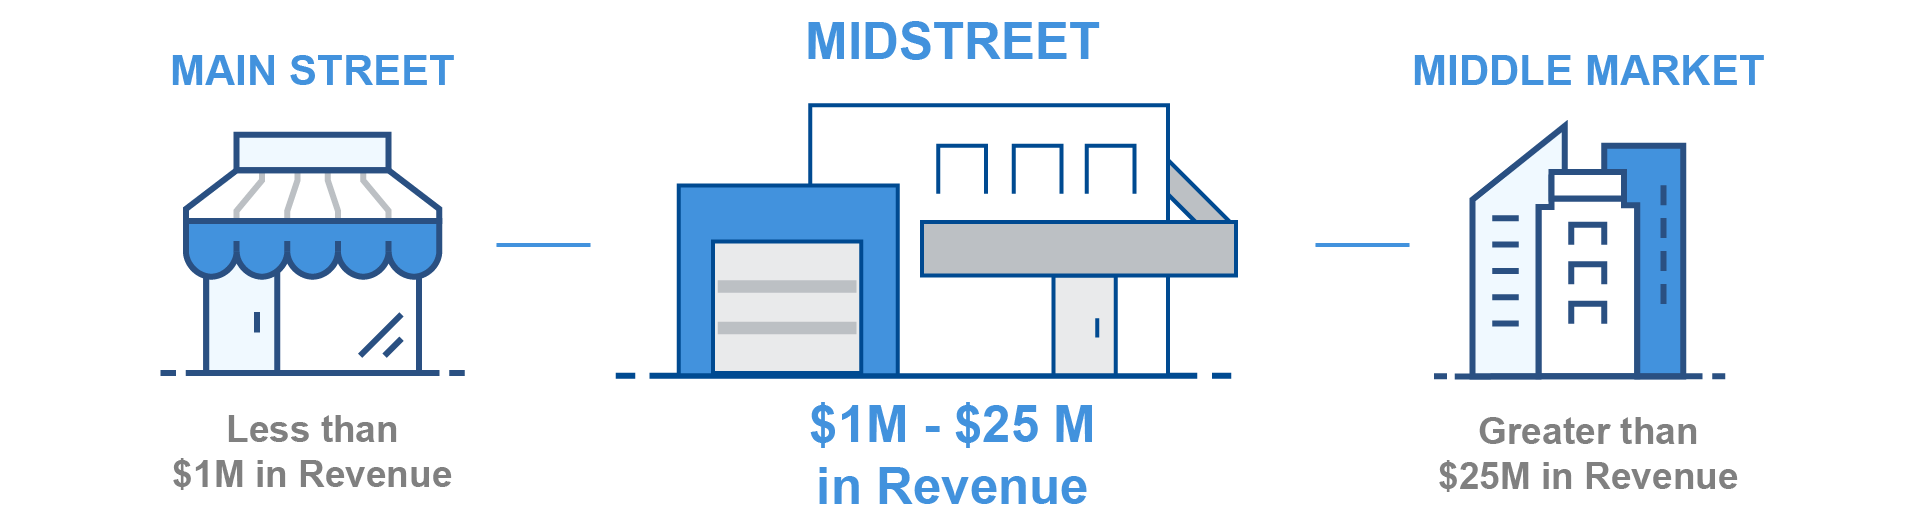 mainstreet, midstreet, and middle market businesses compared by revenue size